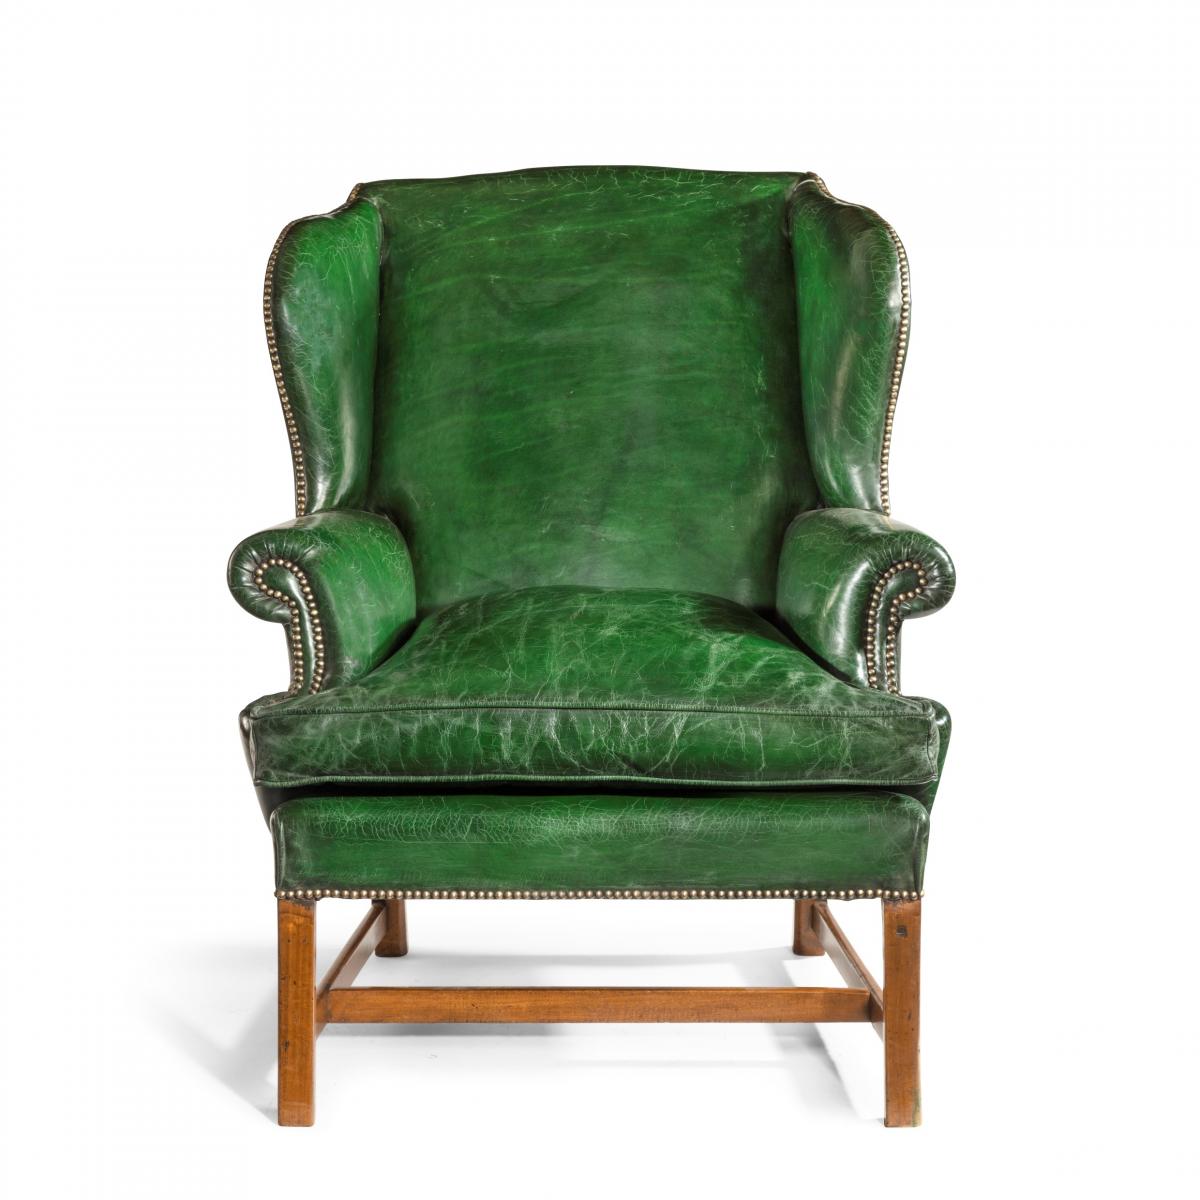 A Generous George III mahogany Wing Arm Chair